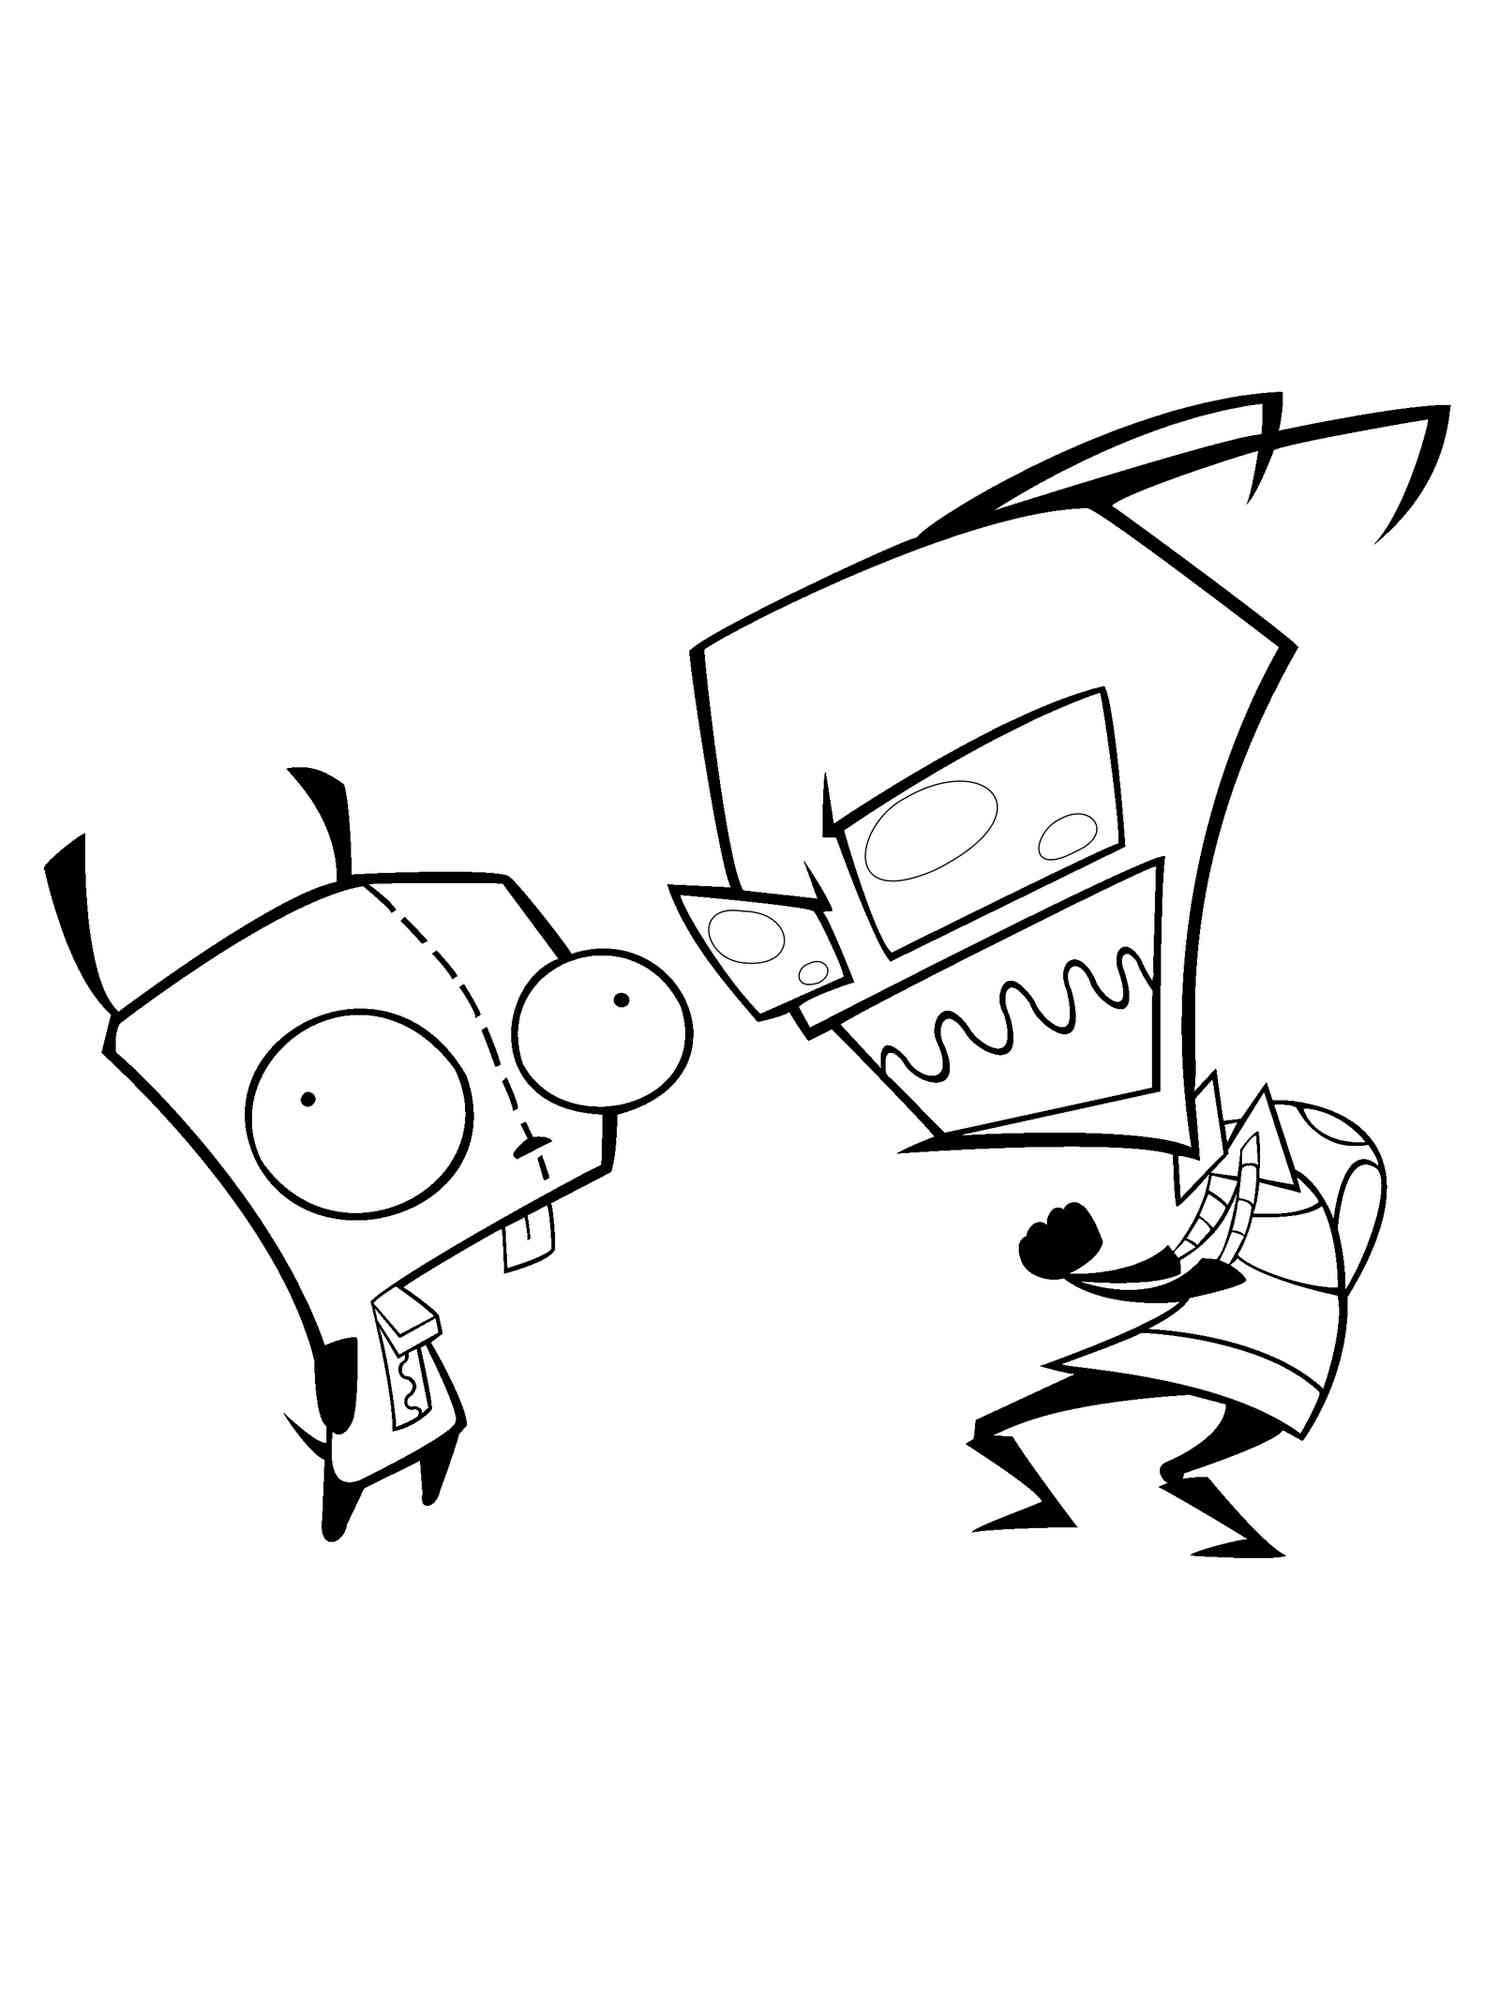 Invader Zim coloring pages